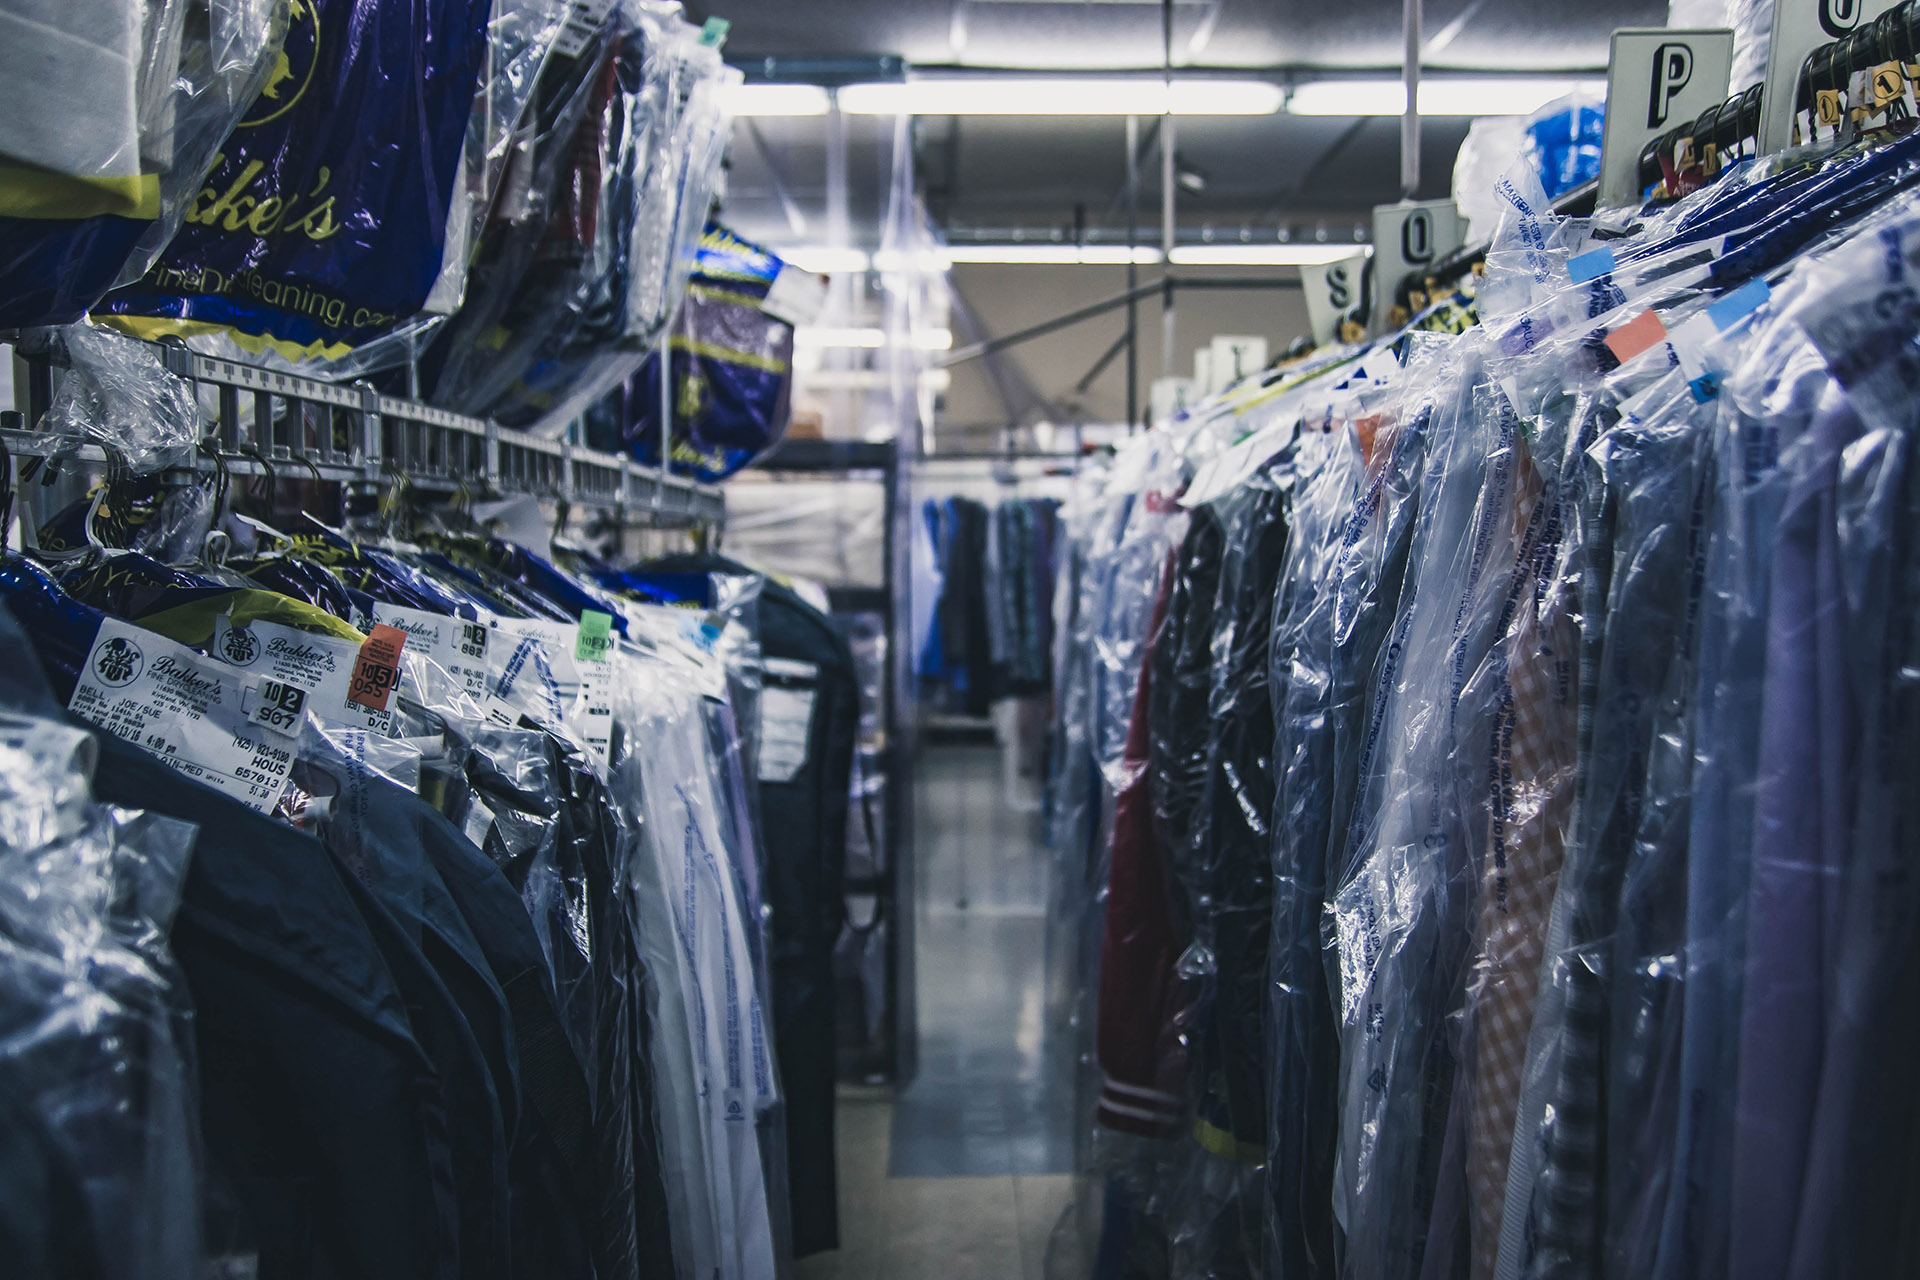 racks dry cleaning plastic bags clothing laundry